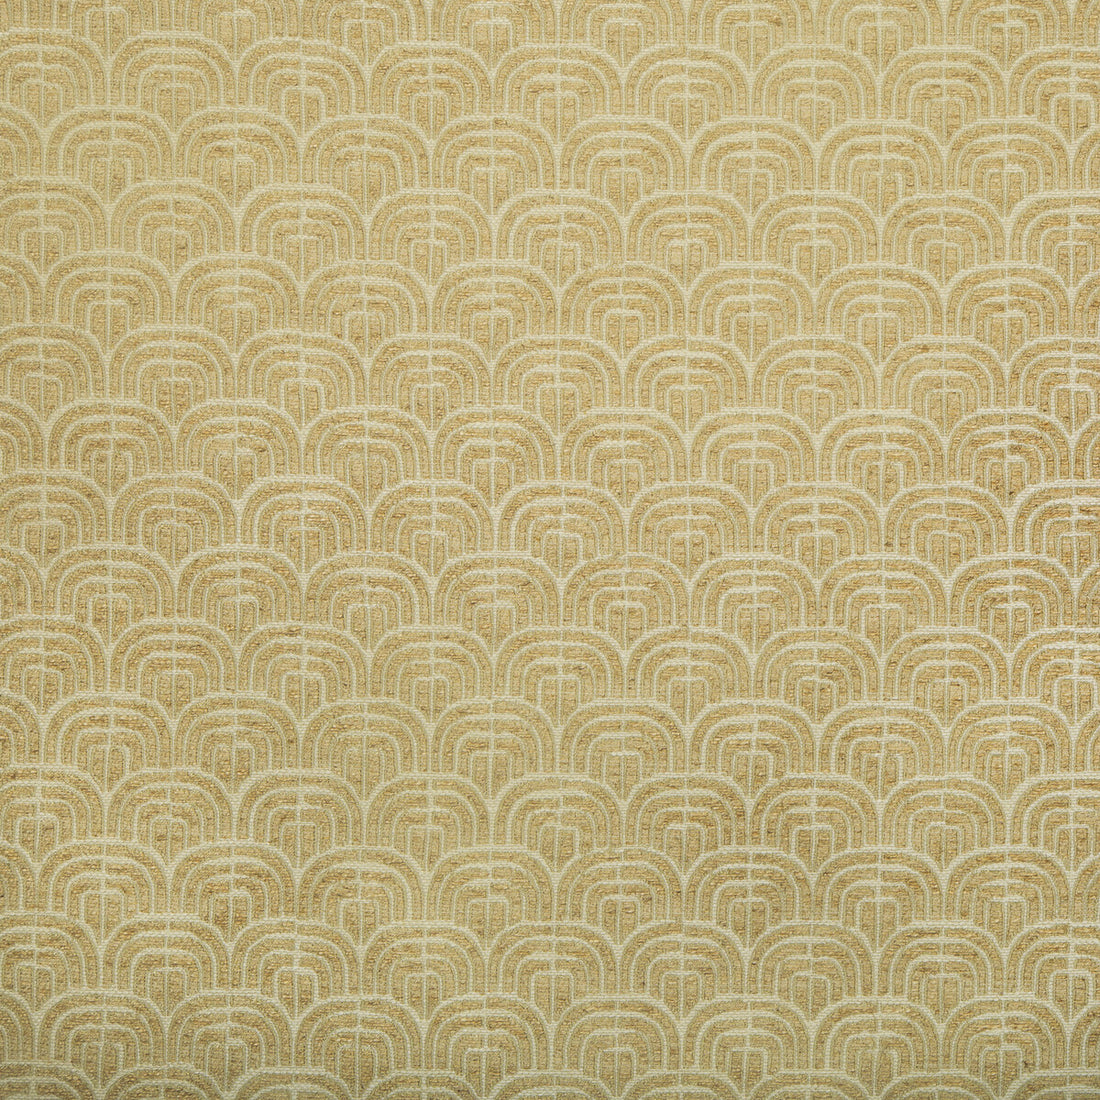 Bale fabric in natural color - pattern 2019155.16.0 - by Lee Jofa in the Carrier And Company collection